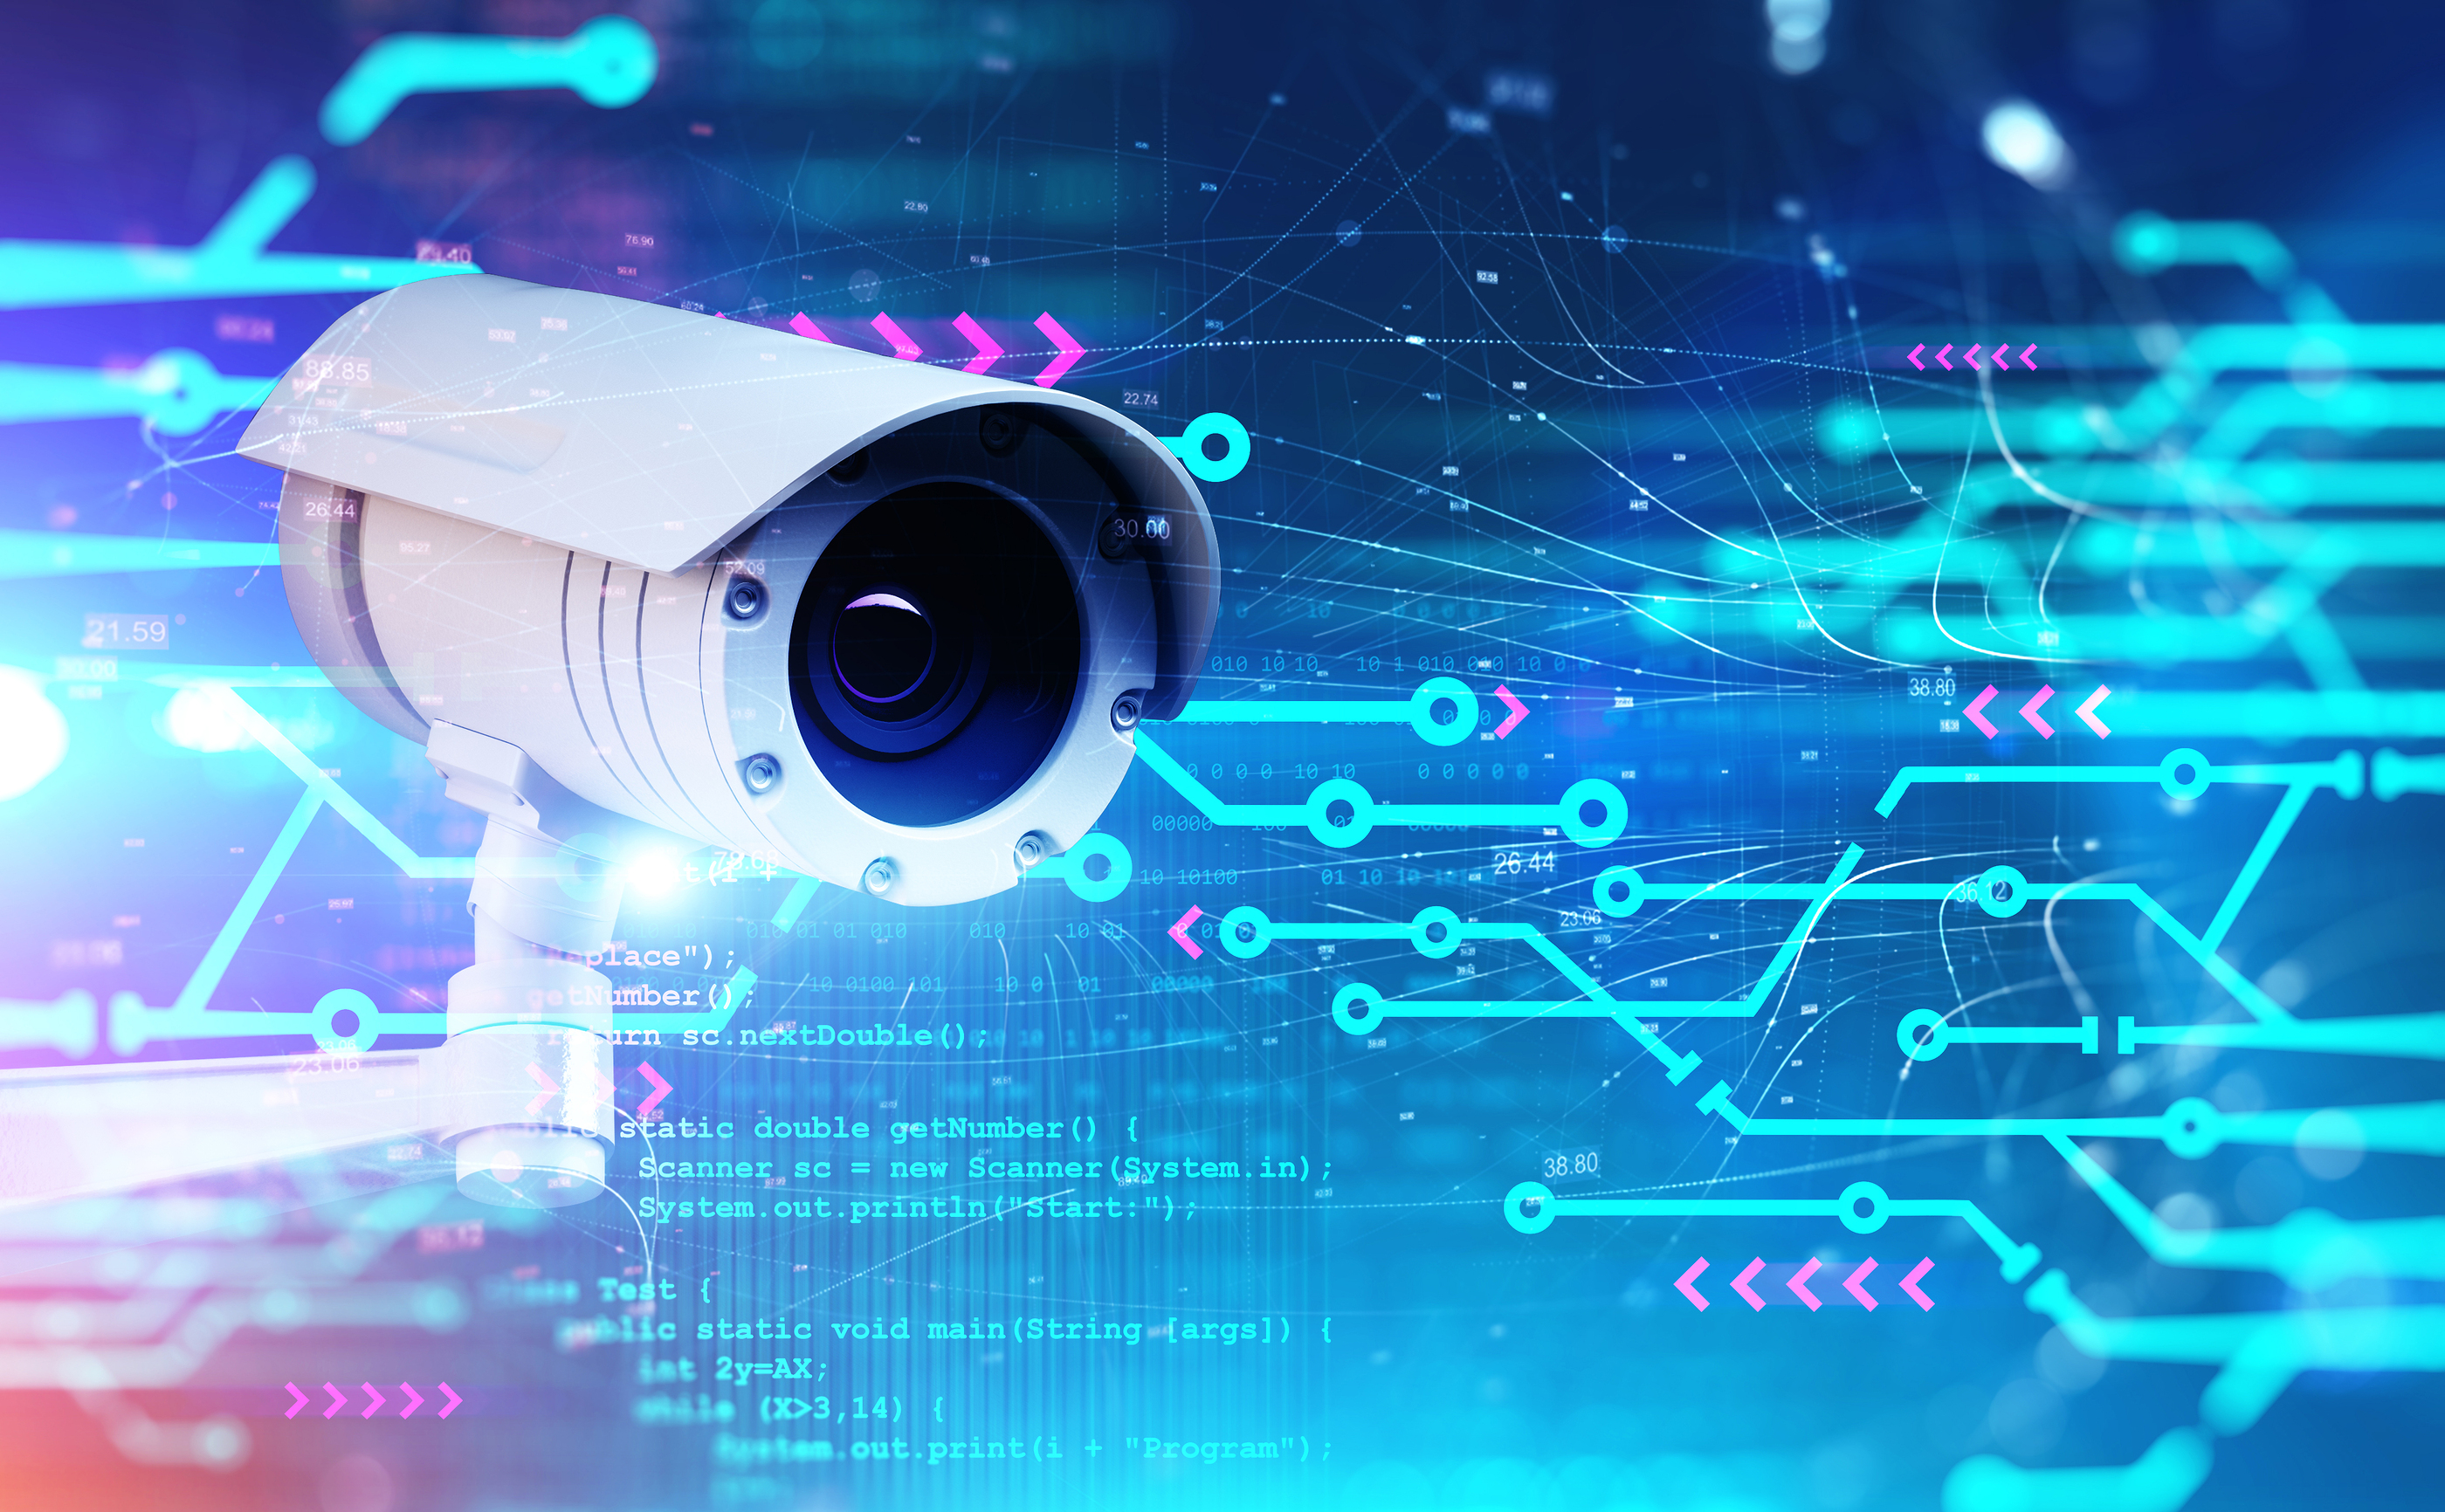 What Should I Consider When Purchasing a Security Camera for My Home or Business?